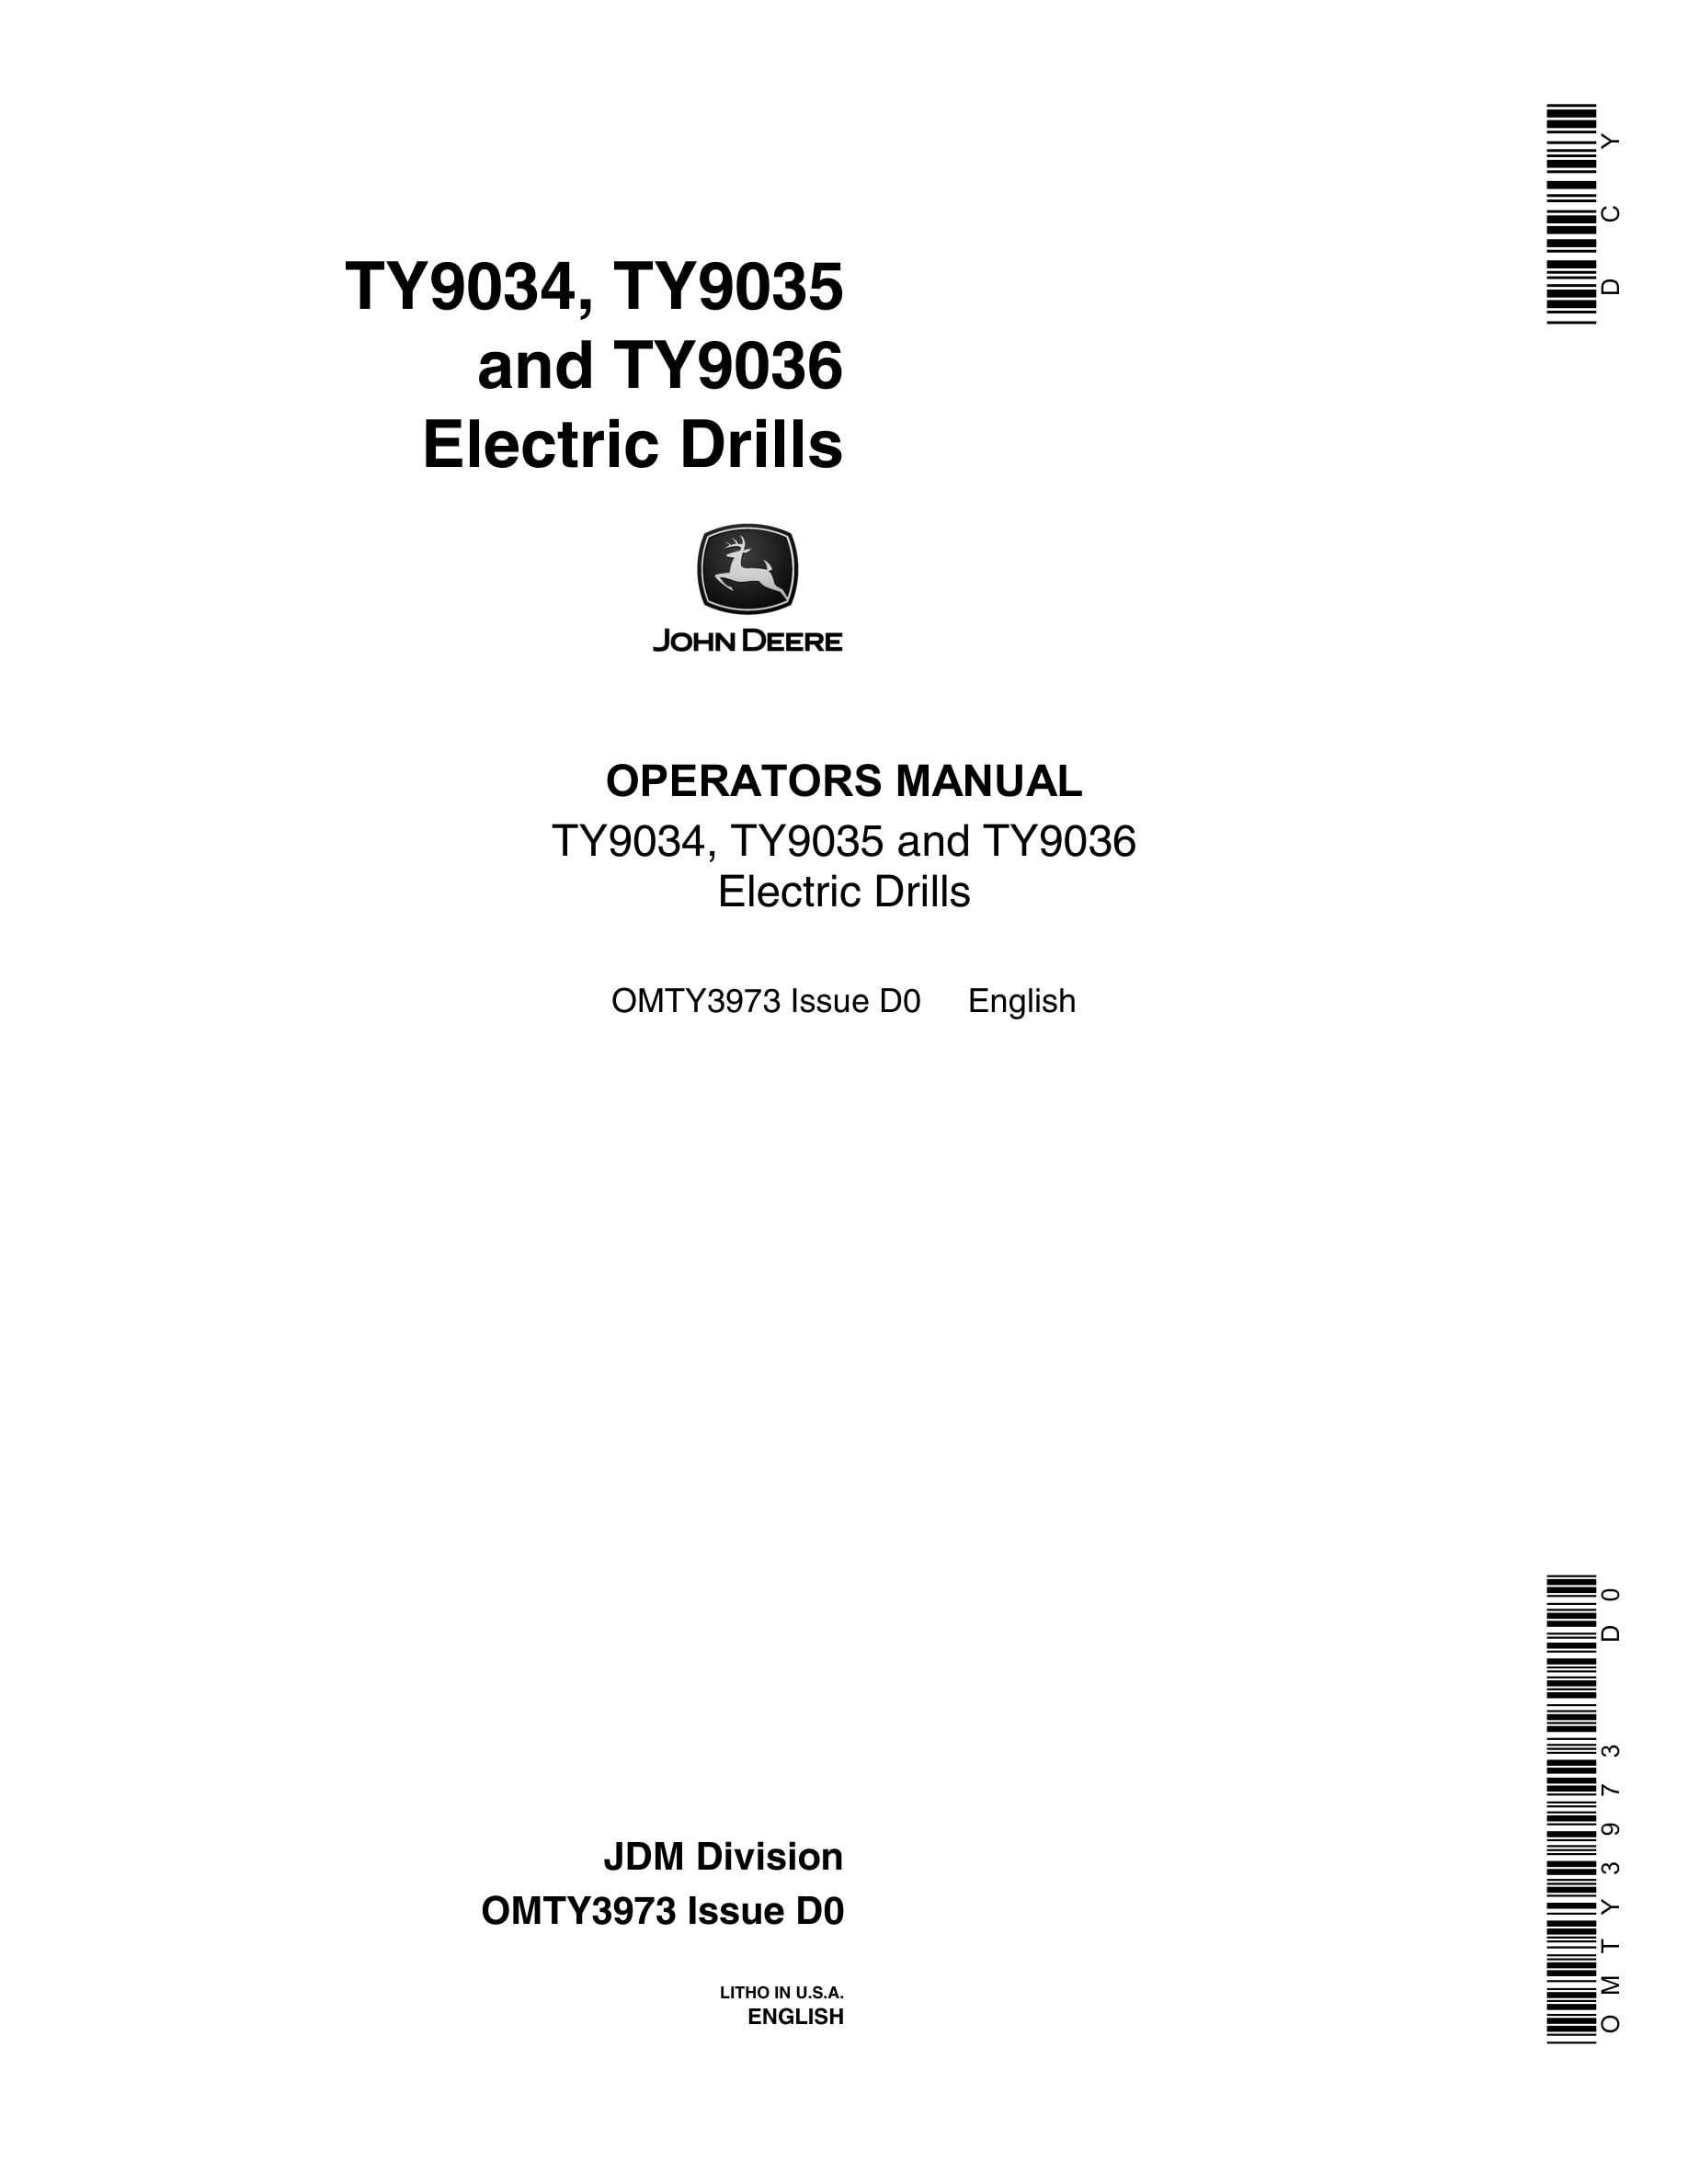 John Deere TY9034, TY9035 and TY9036 Electric Drill Operator Manual OMTY3973-1